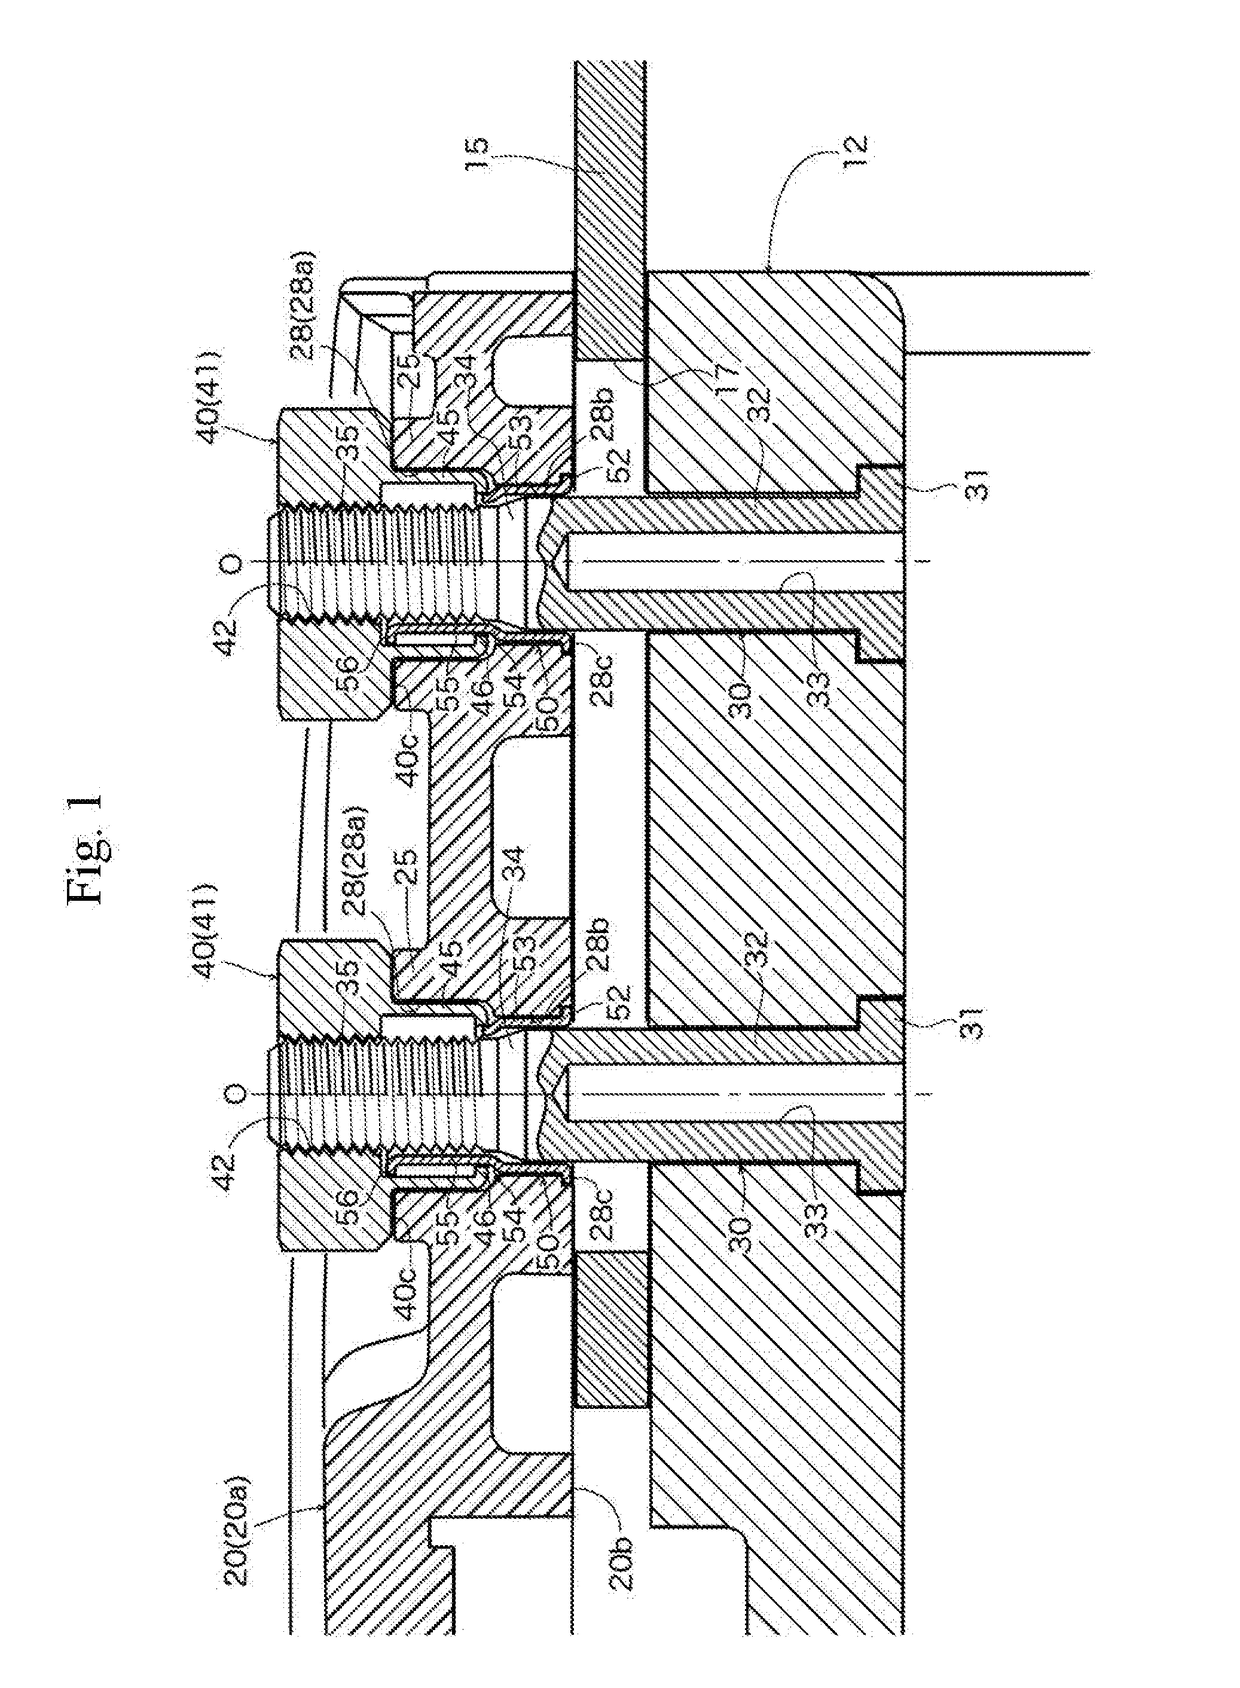 Structure for preventing falling of fastening nut of portable power working machine, and method for attaching fastening nut to cover